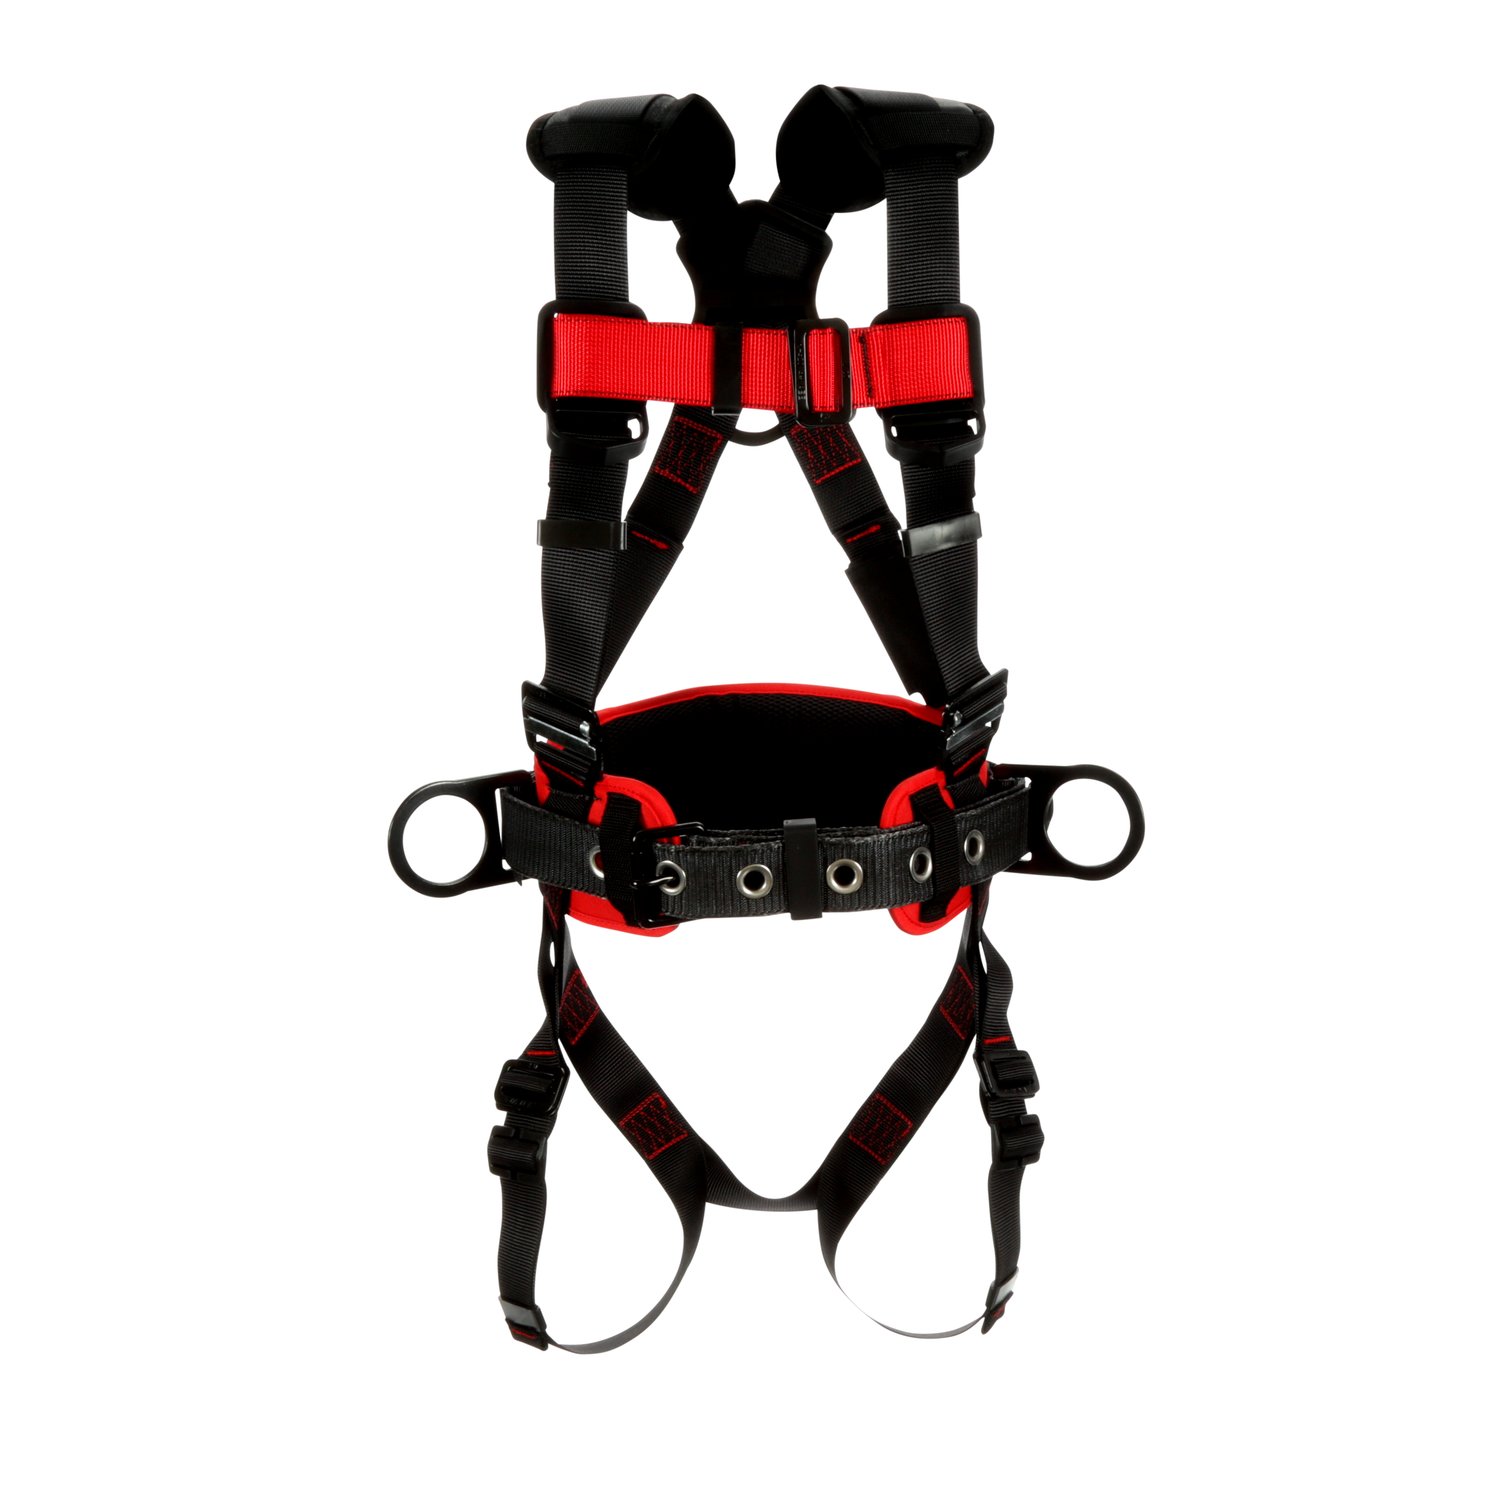 7012816647 - 3M Protecta P200 Construction Positioning Safety Harness 1161307, 2X